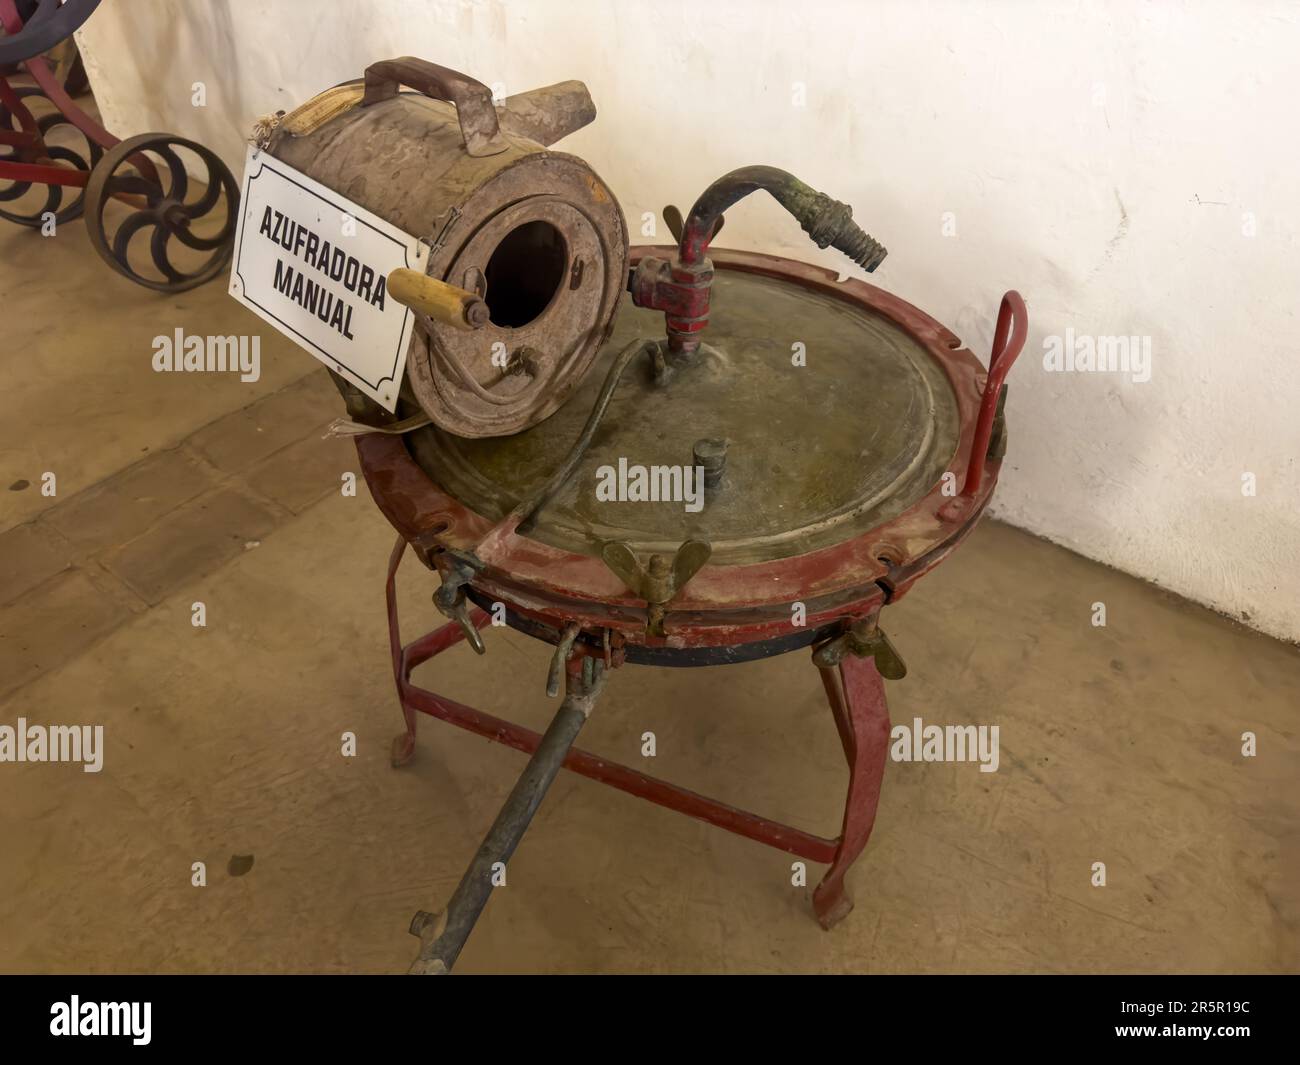 An vintage manual sulfator for applying sulfate to the grape vines in a vineyard.  La Abeja Winery, San Rafael, Mendoza, Argentina. Stock Photo